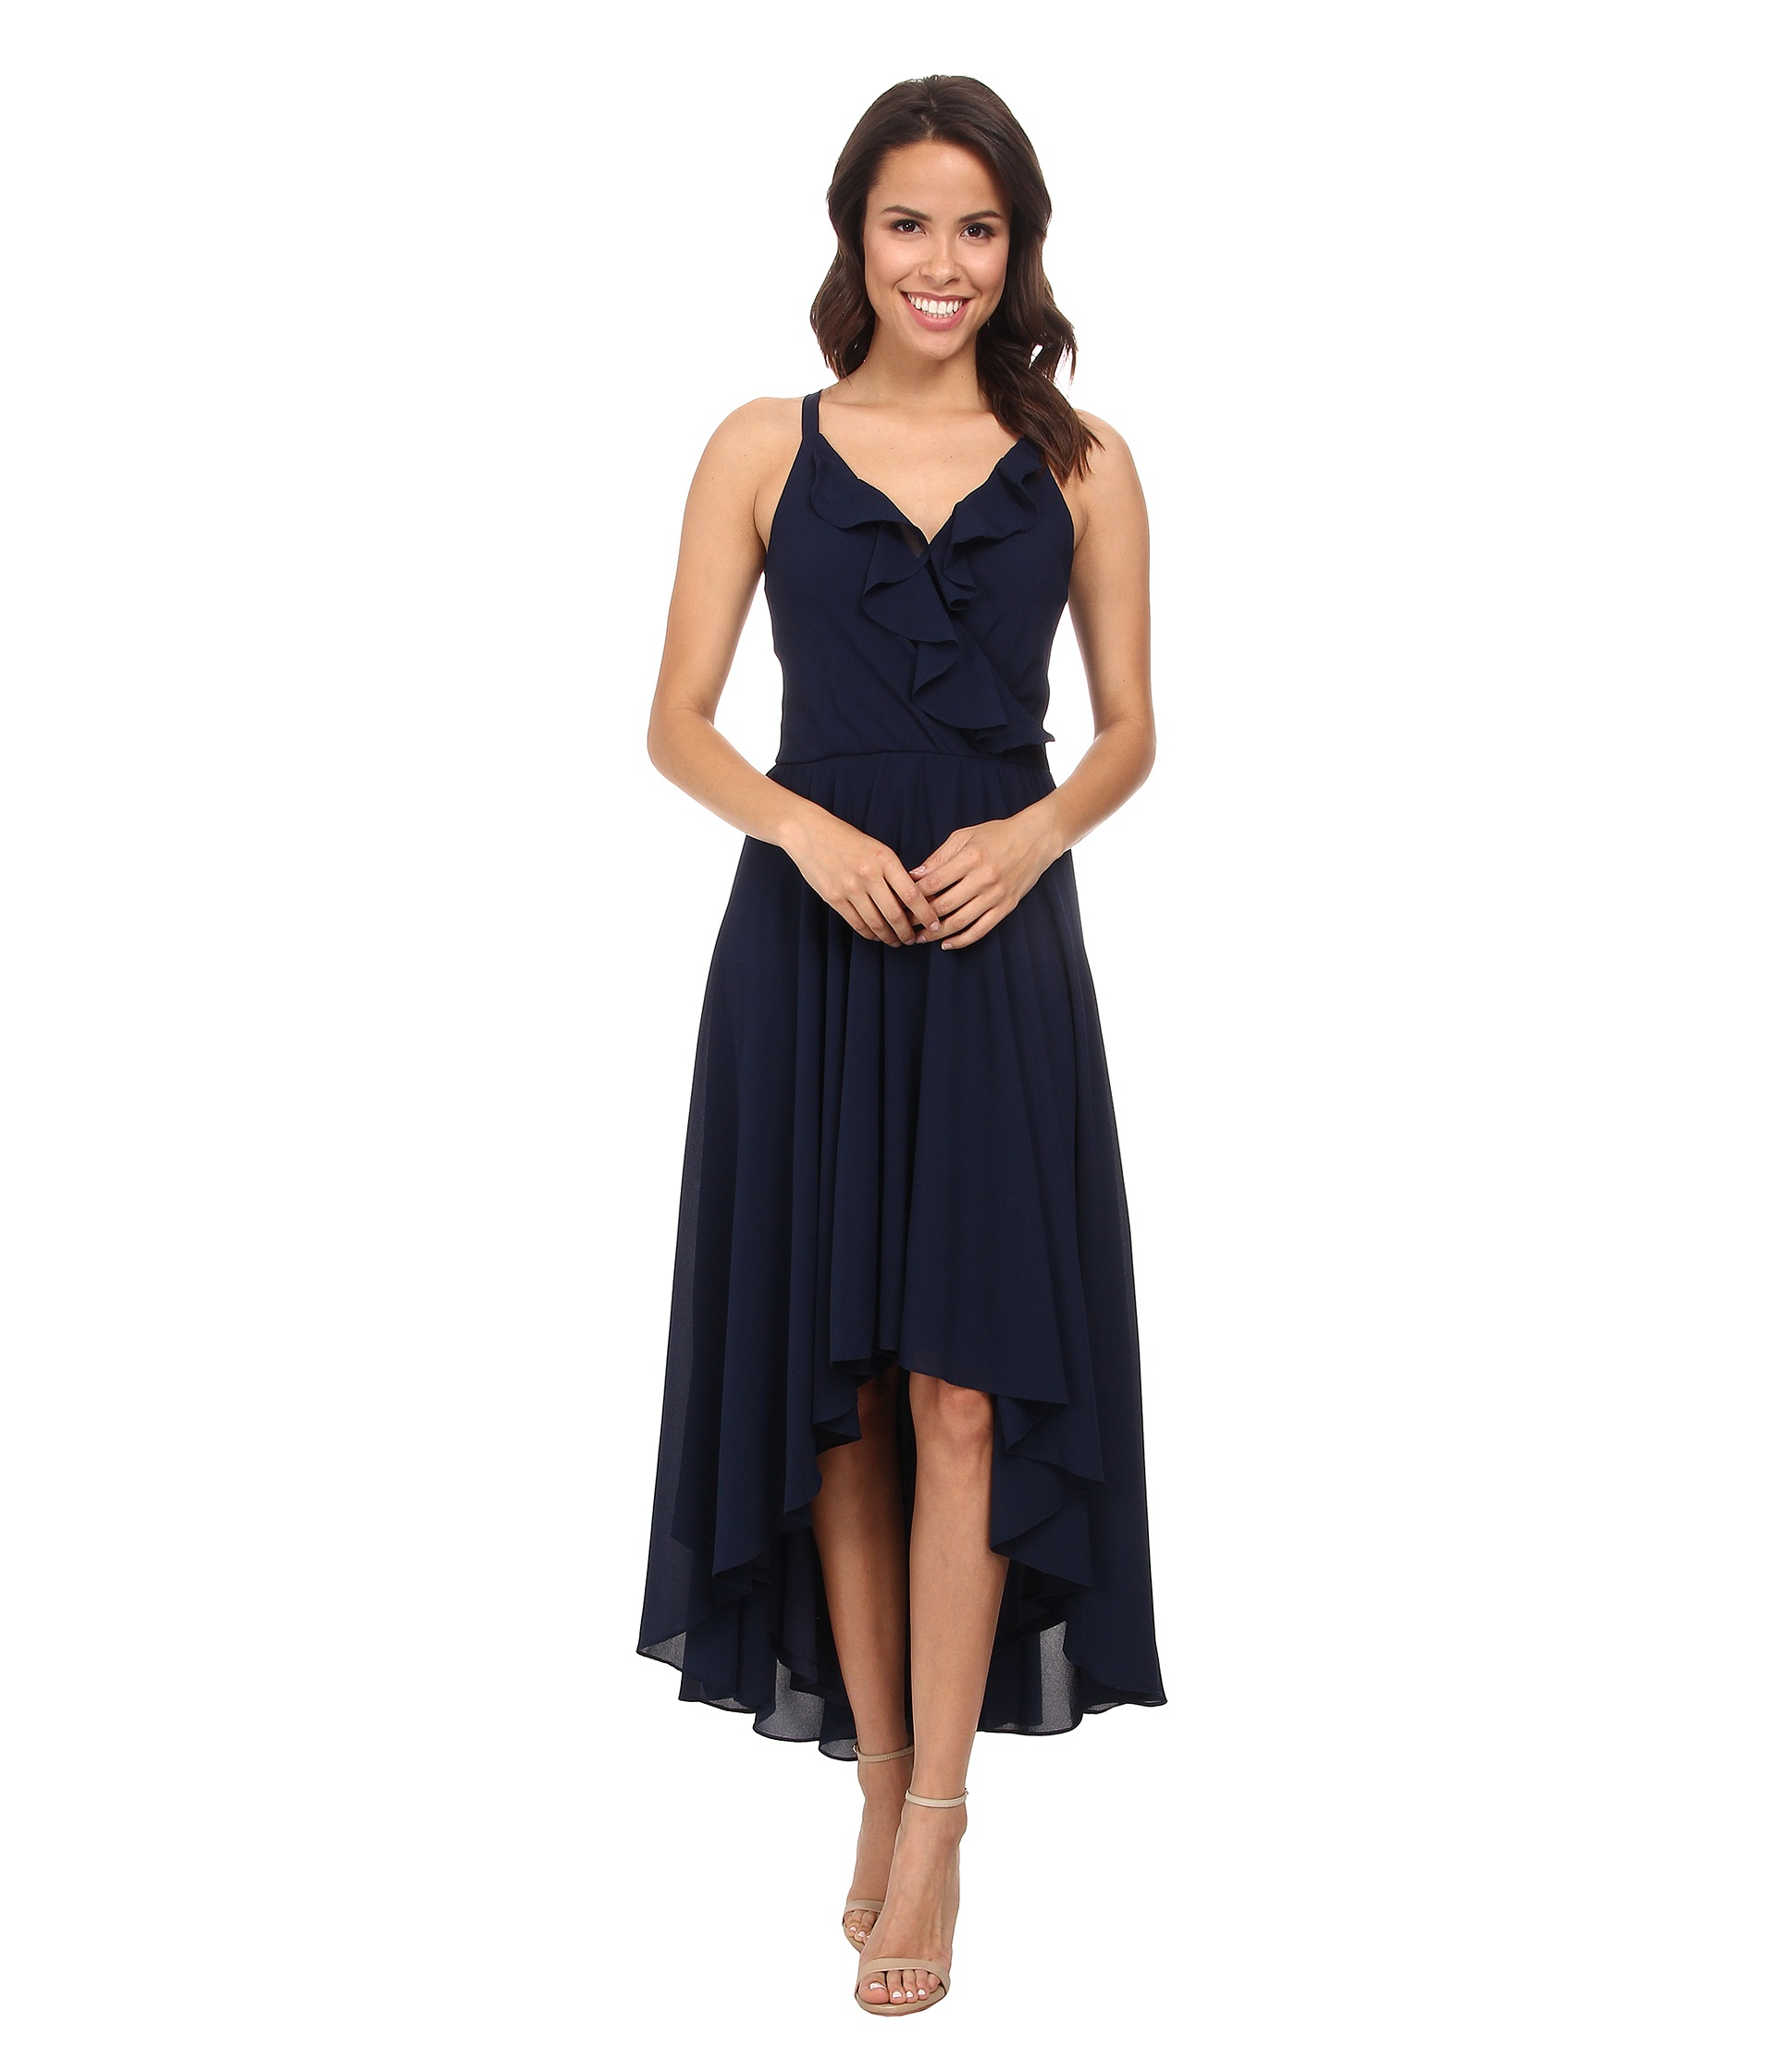 Lyst - Kut From The Kloth Solid Chiffon Dress in Blue